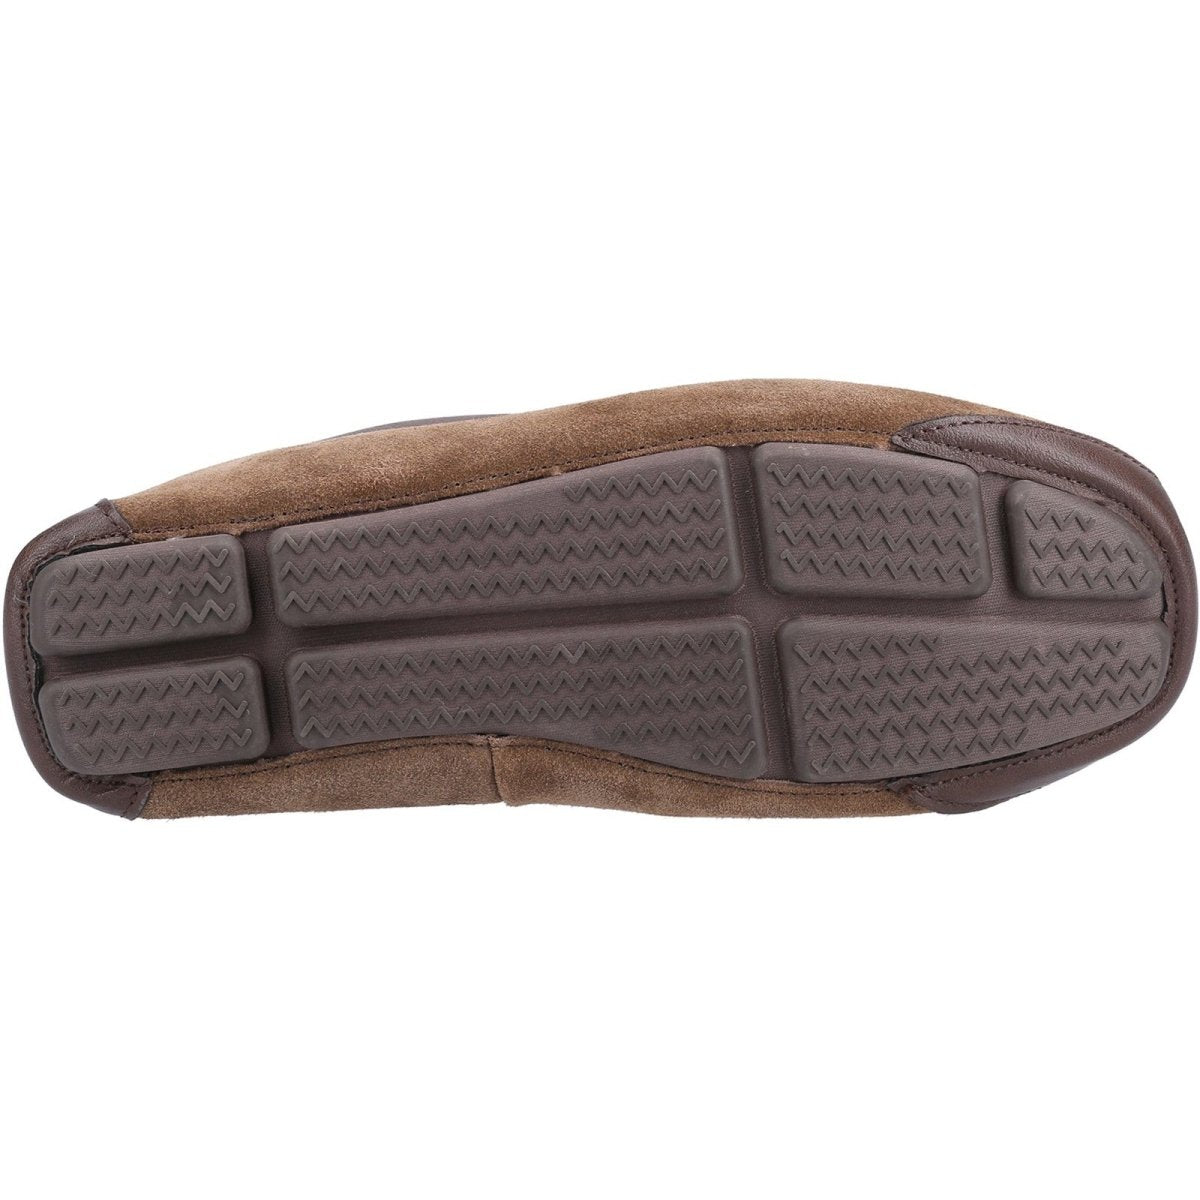 Cotswold Northwood Sheepskin Mens Moccasin Slippers - Shoe Store Direct